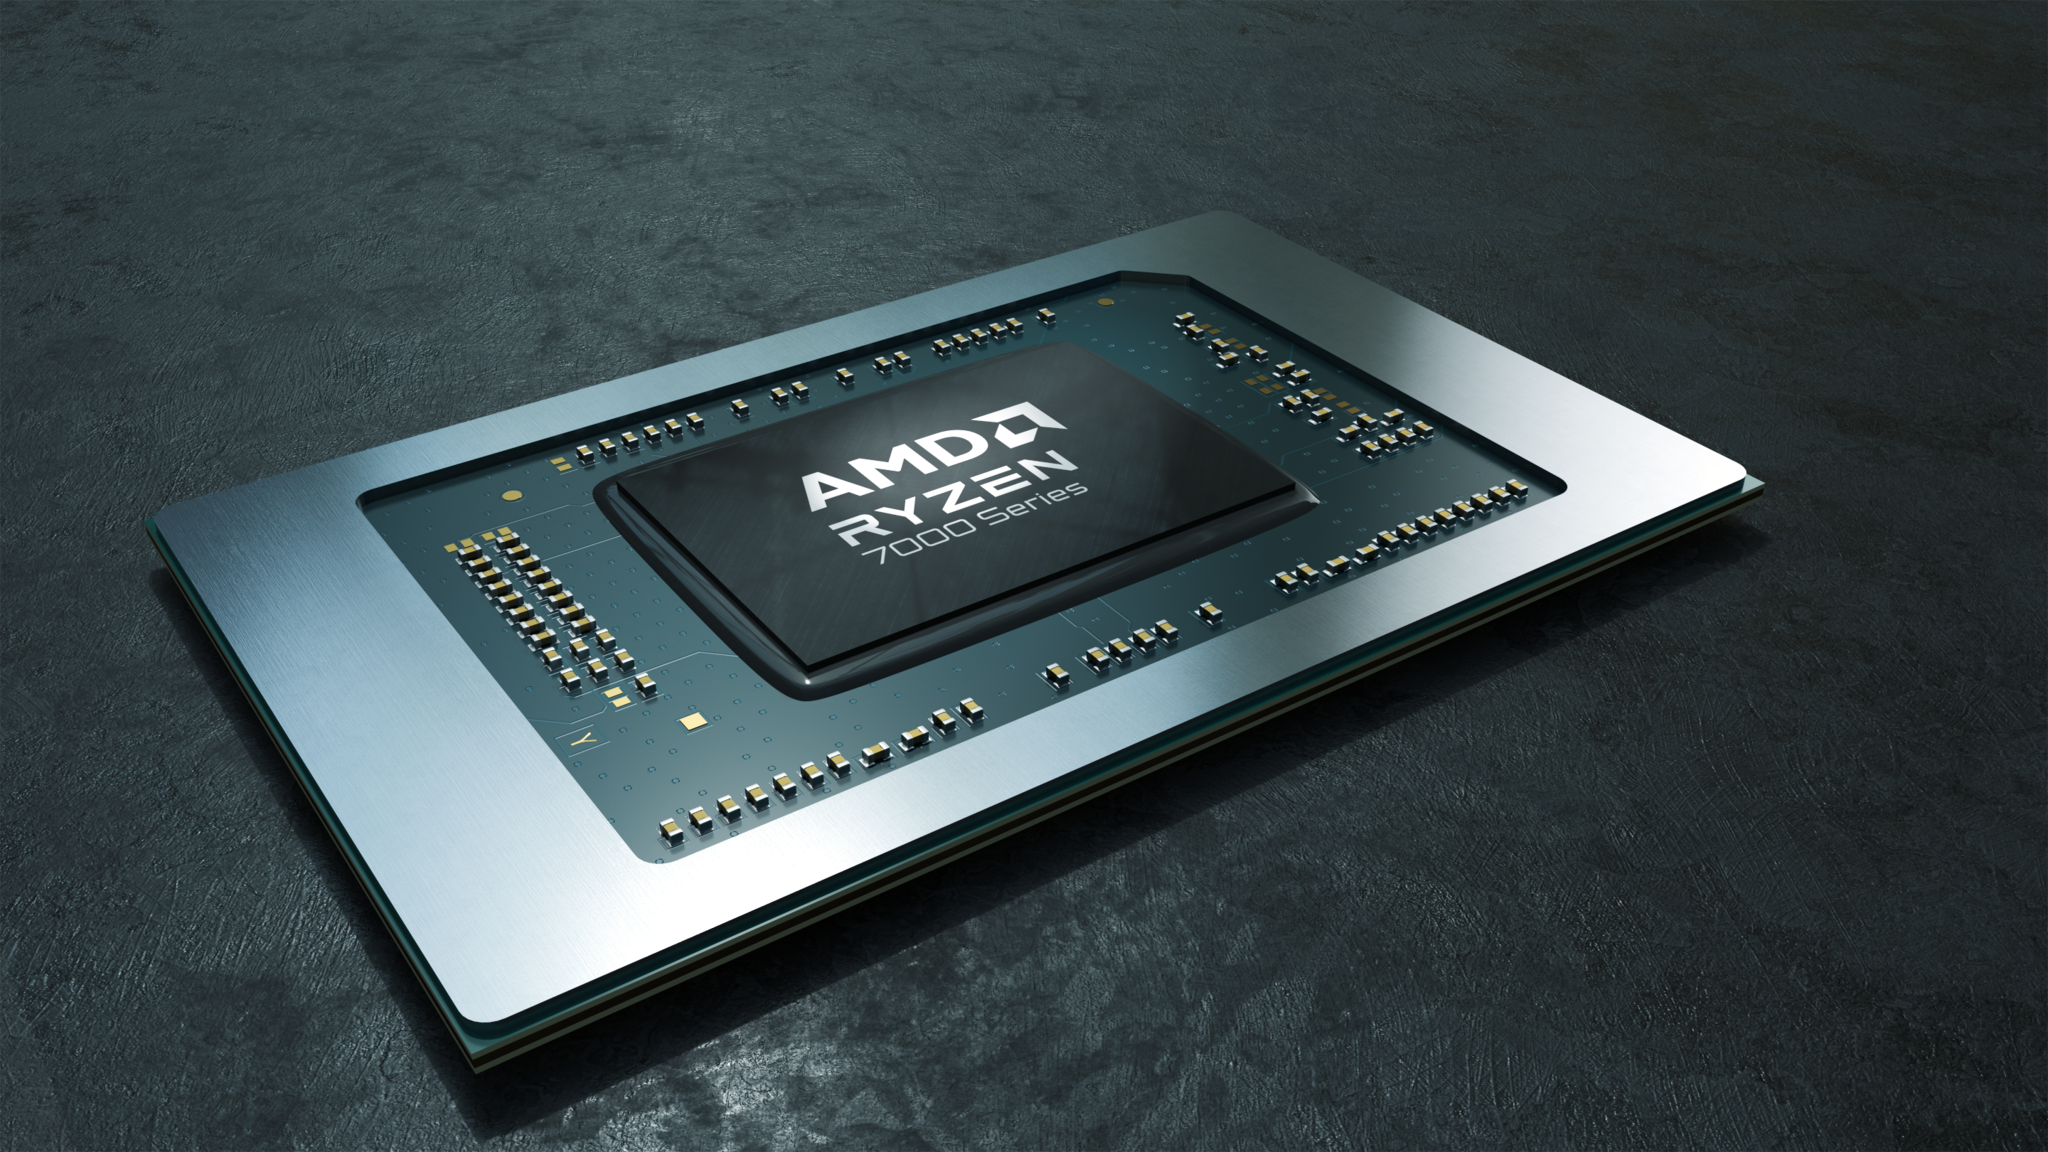 AMD's new laptop APU nearly twice as fast as Steam Deck in leaked graphics benchmark